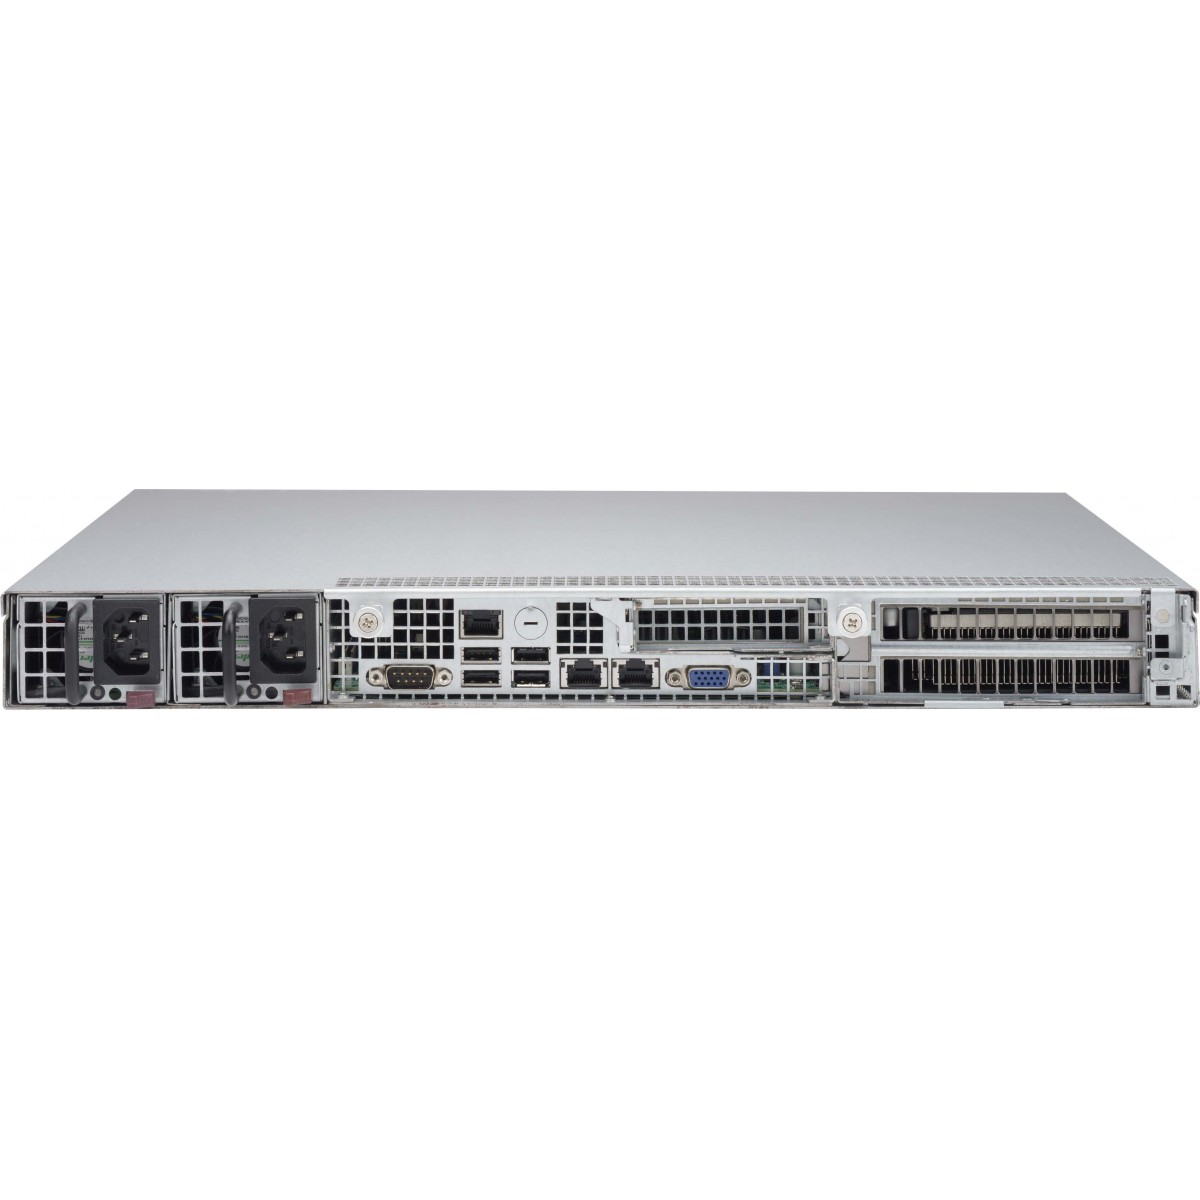 Supermicro chassis CSE-514-R407W 1.Support WIO MB, max MB size 12.3" x 13" and Proprietary MB 8" x 13", 2.Up to 2 x 2.5" fixed w